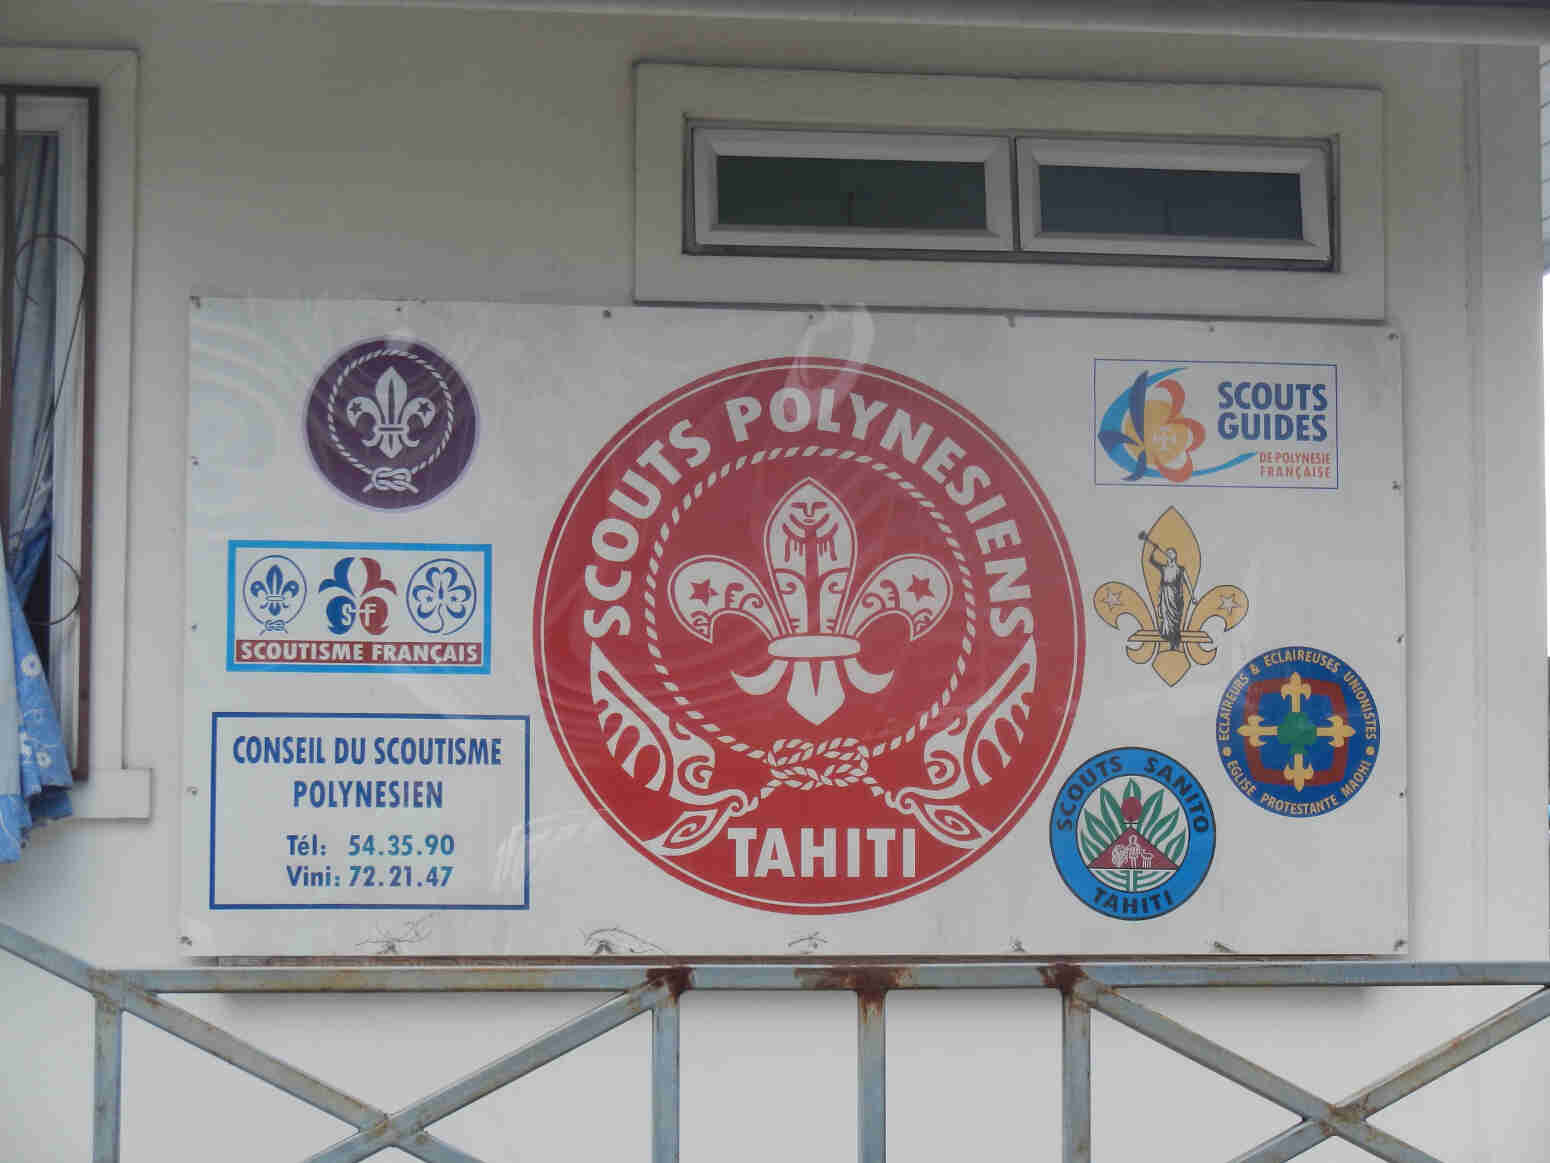 They have Scouts in Tahiti